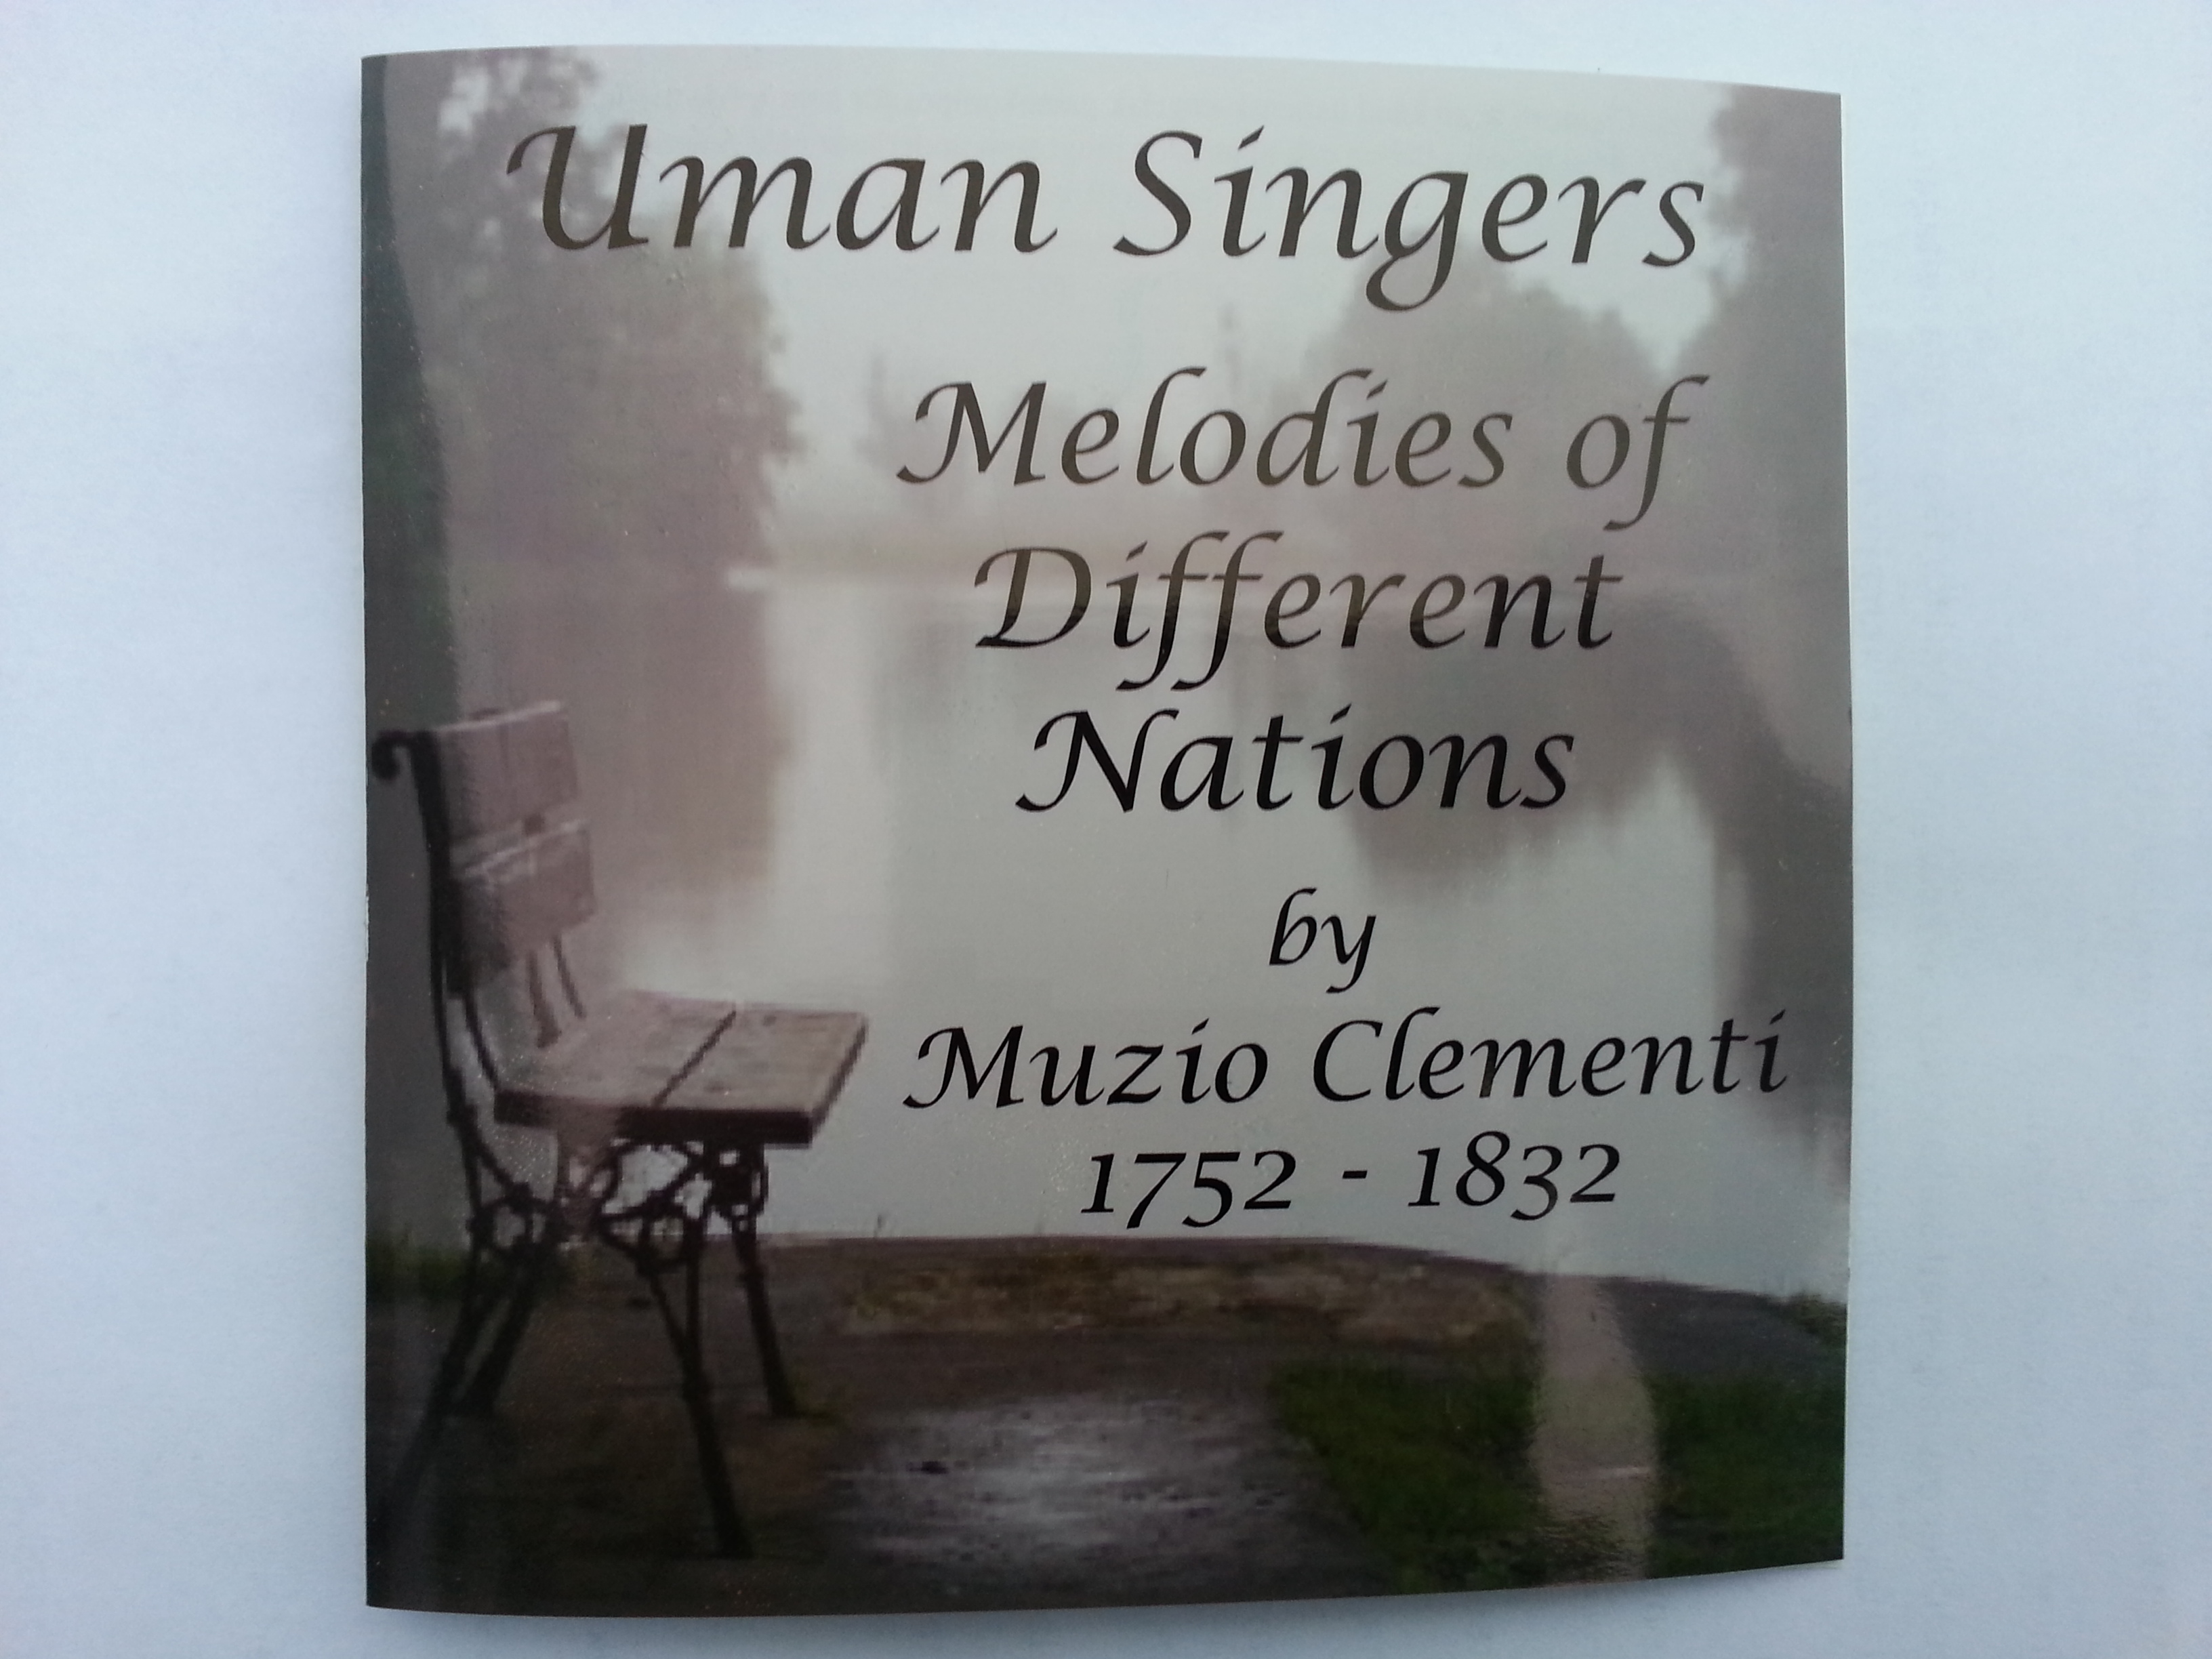 CD of the Swedish Clementi Society (front)